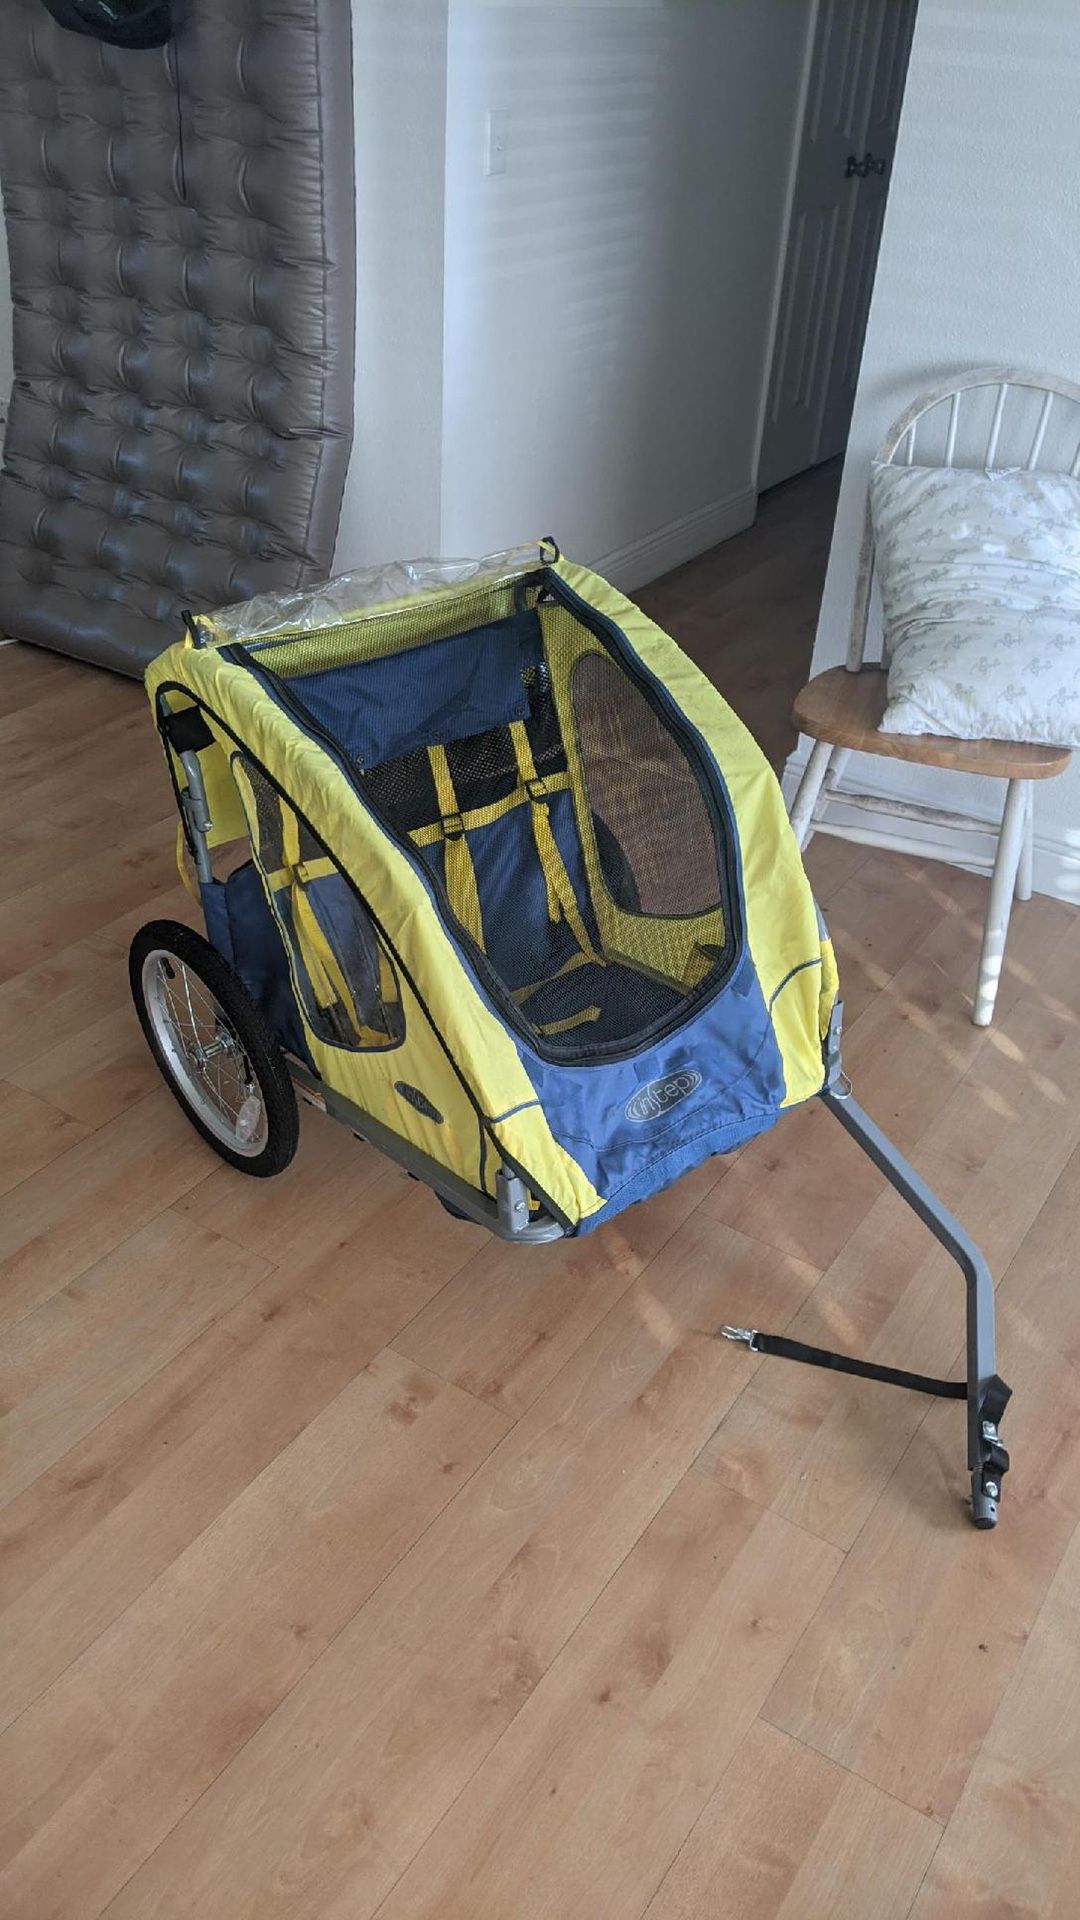 Bike Trailer for Kids | Baby Carriage